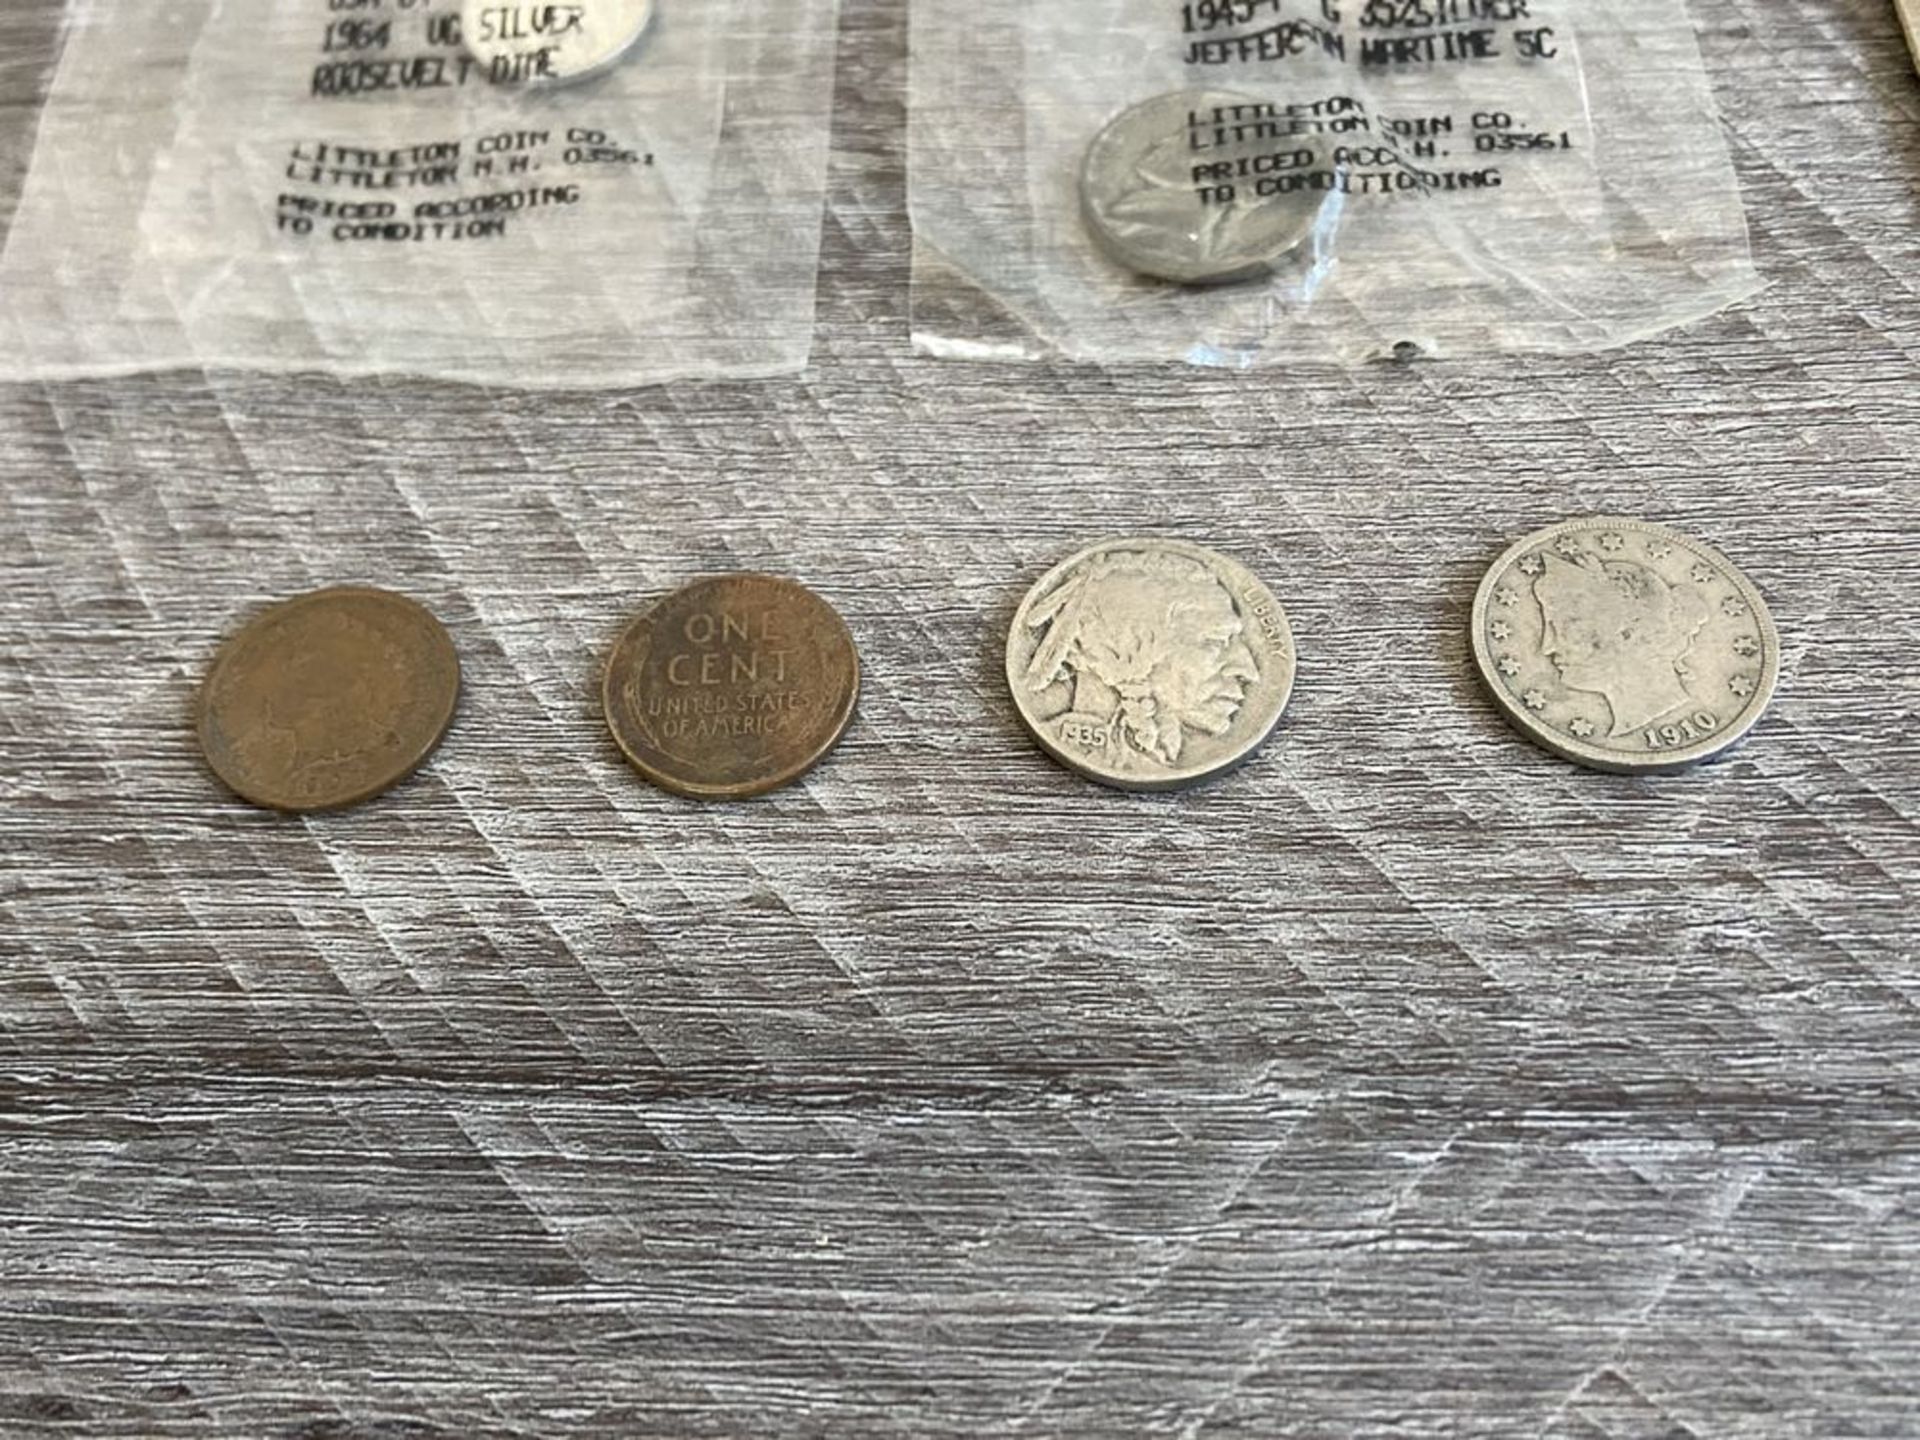 Collection of Old American Coins: Buffalo Nickle, Roosevelt Dime, Wheat Penny, Etc - Image 3 of 3